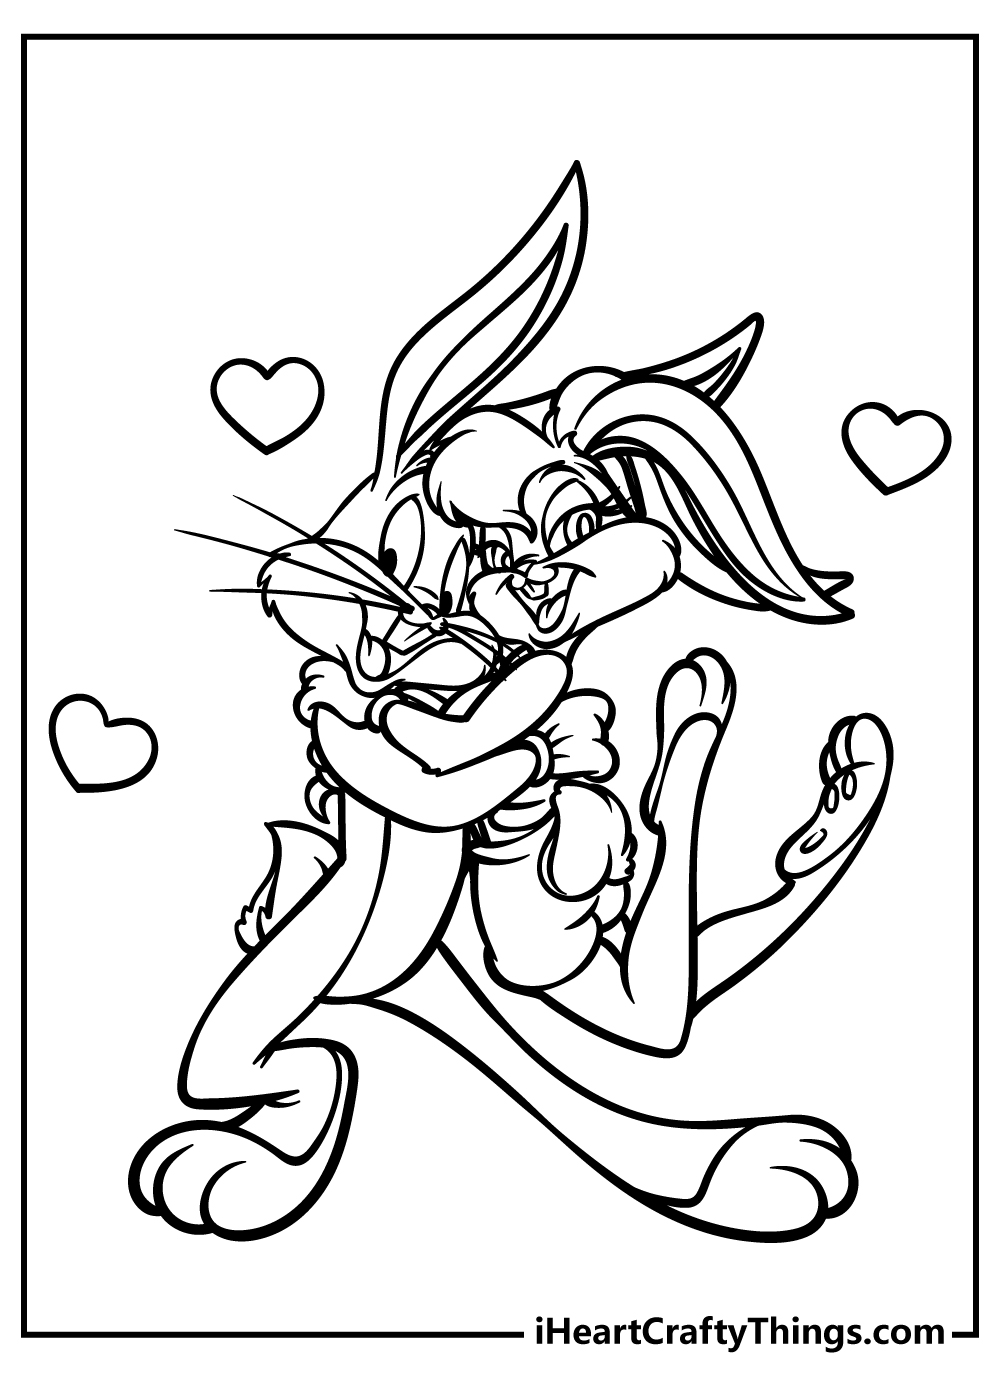 Looney Tunes Coloring Pages for adults free printable